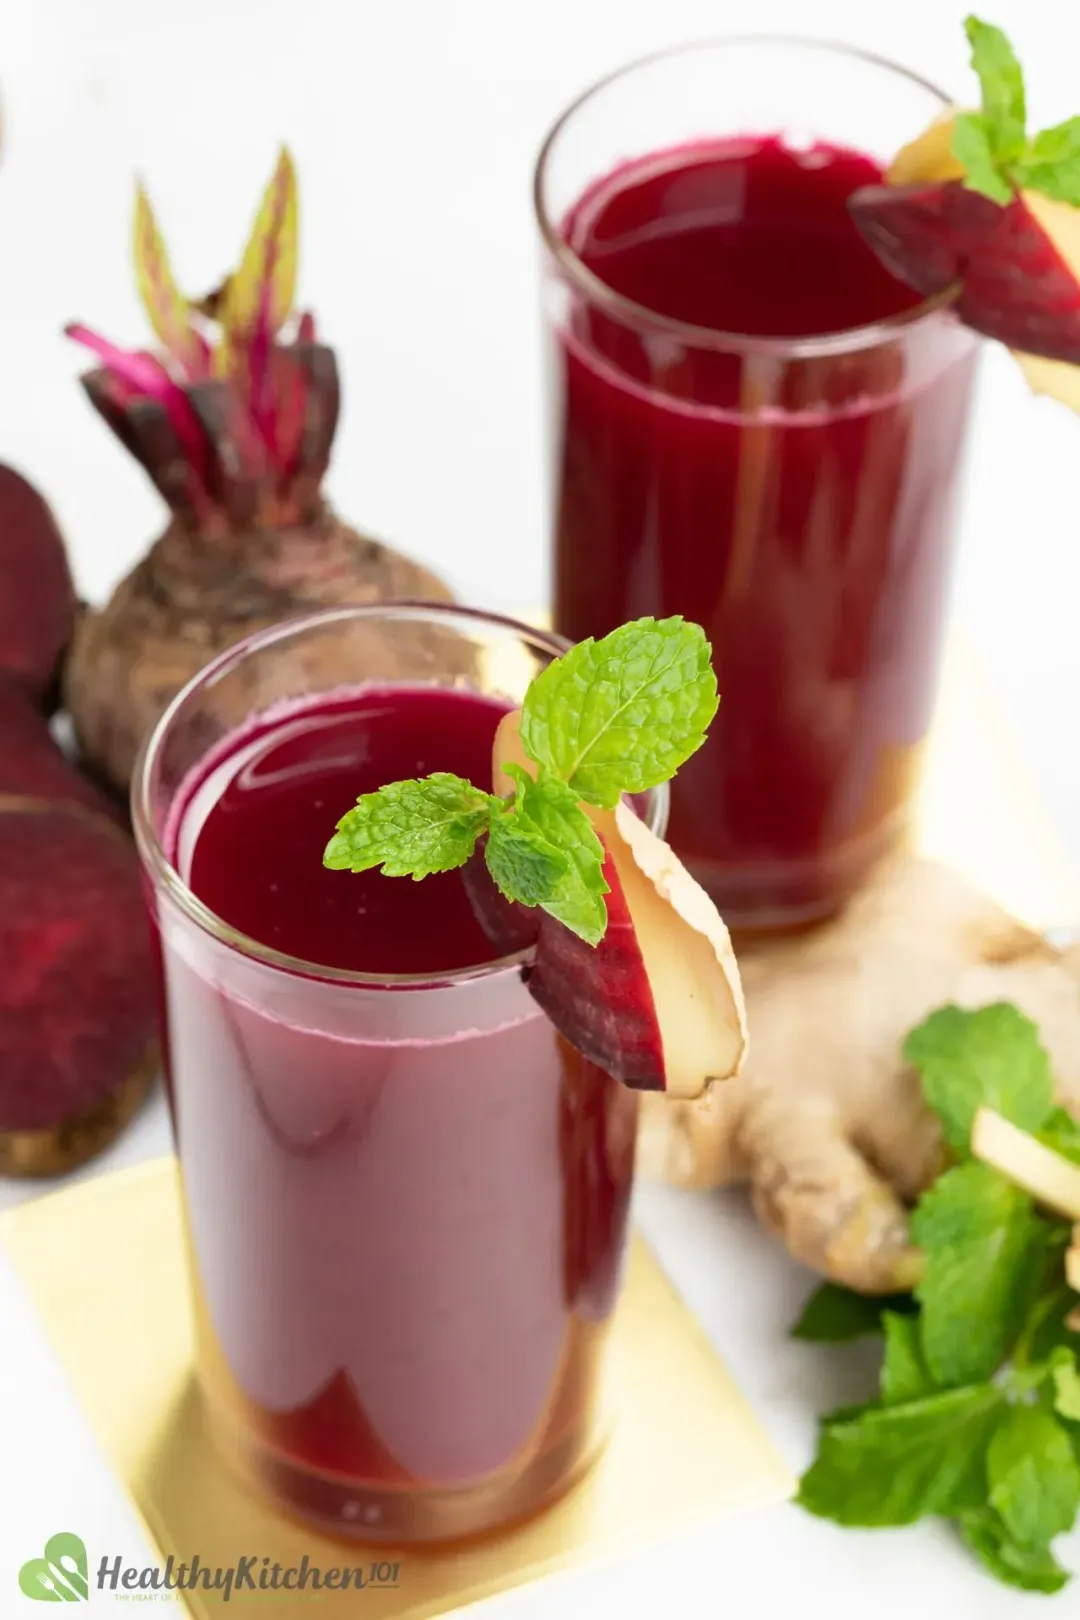 Two glasses of beetroot juice garnished with ginger slices, mint sprigs, and put next to whole beets